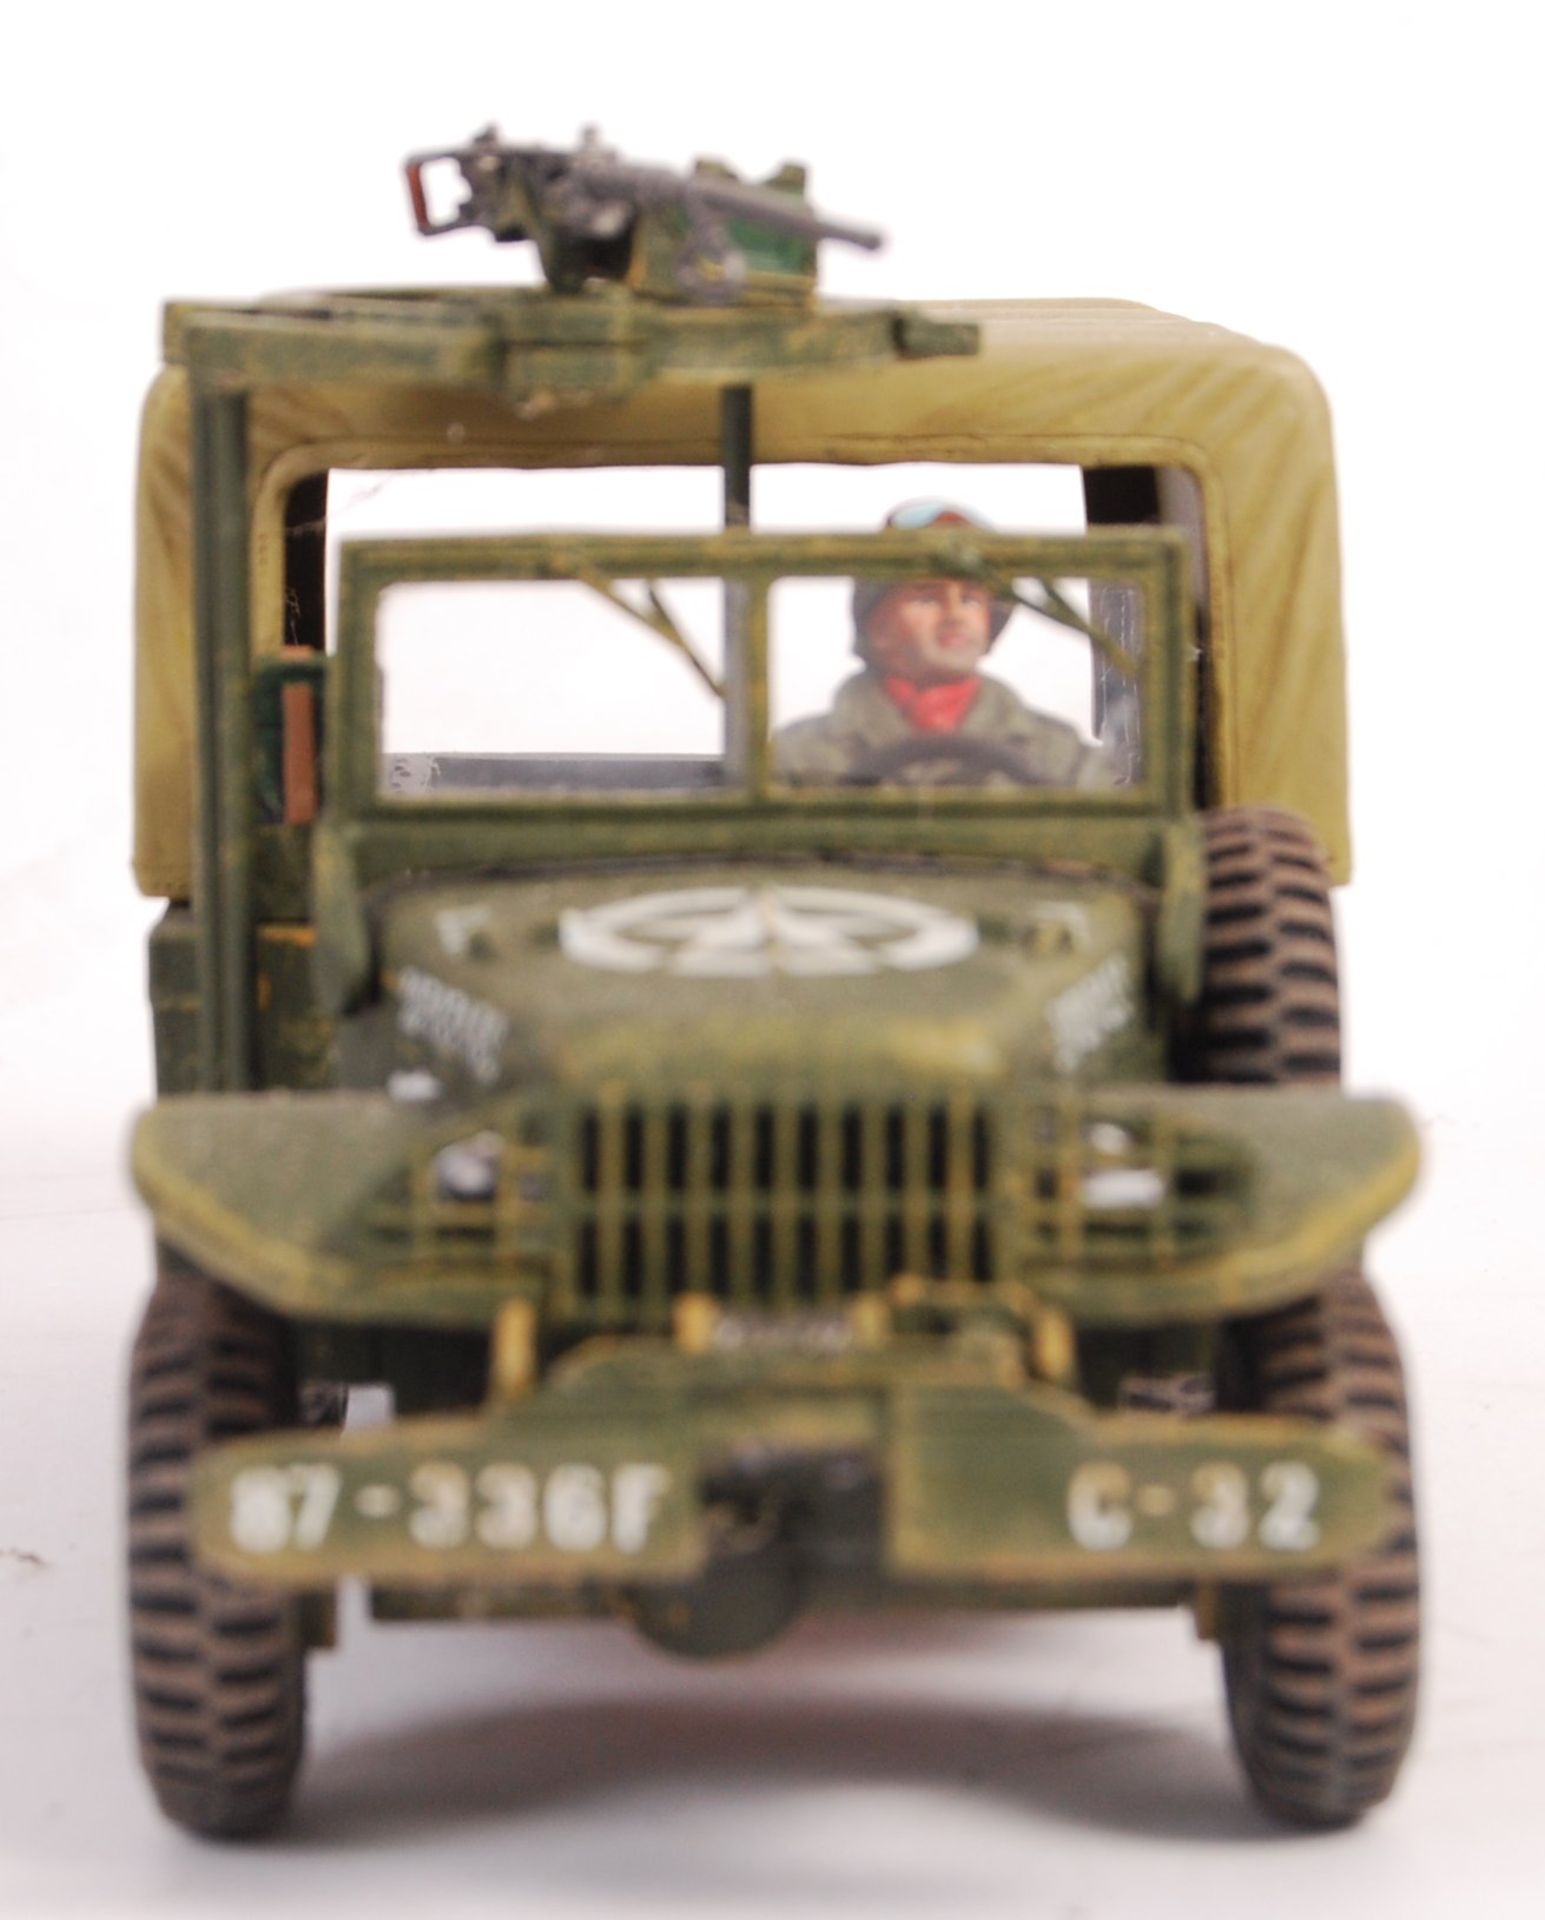 KING & COUNTRY BOXED 1:30 SCALE MODEL BATTLE OF THE BULGE VEHICLE - Bild 3 aus 6